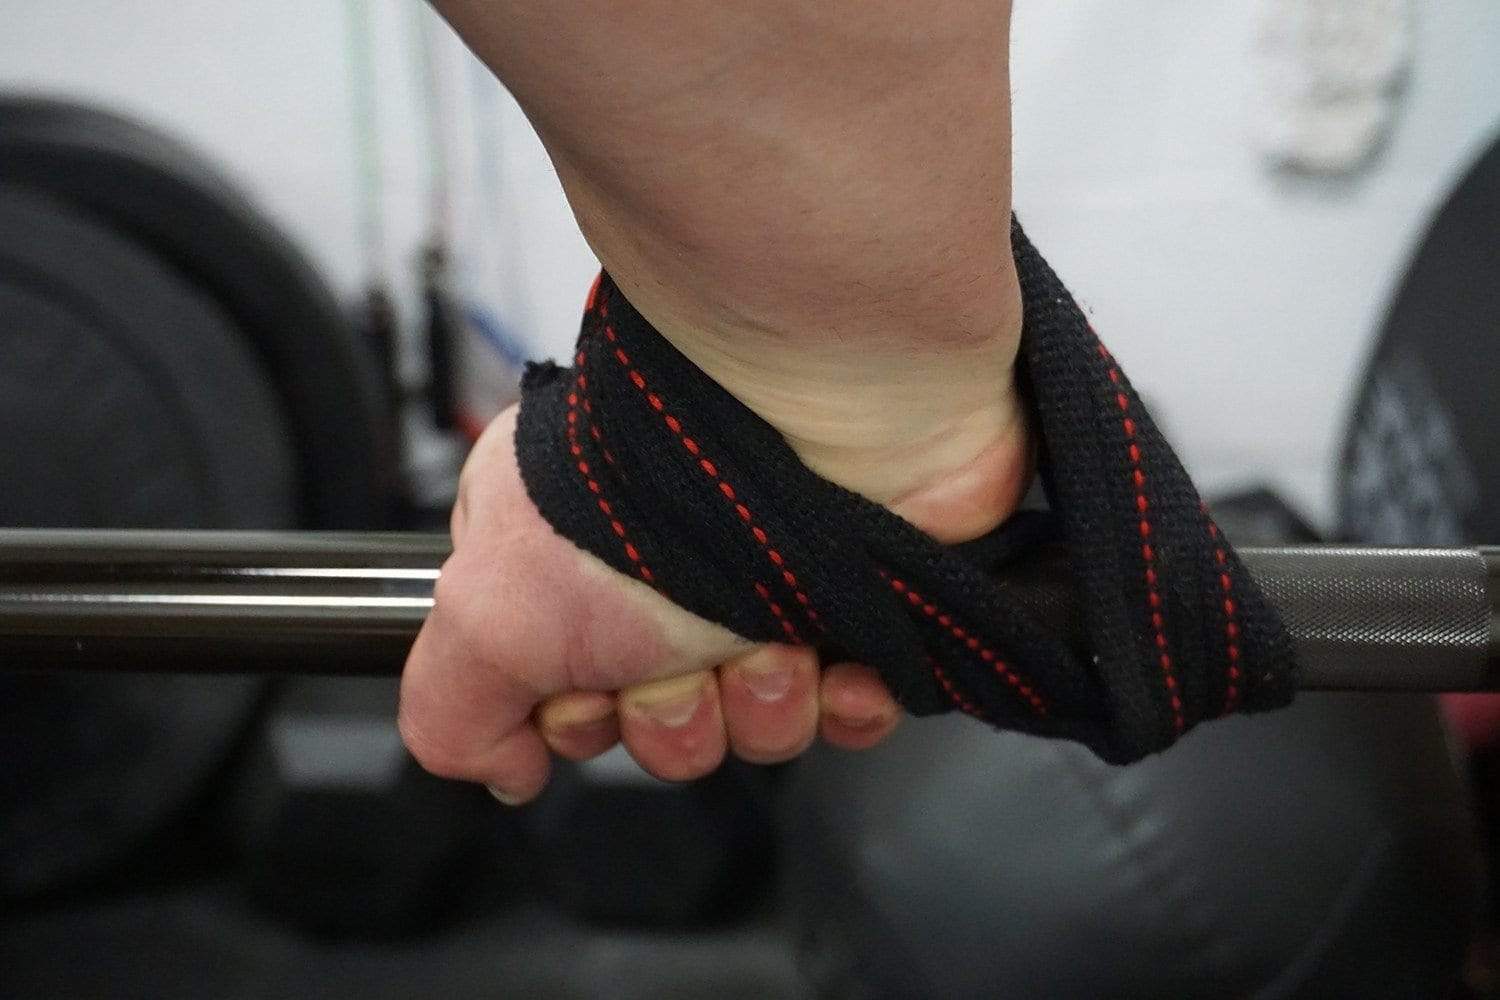 Maximize Your Lift: The Essential Guide to Weightlifting Wrist